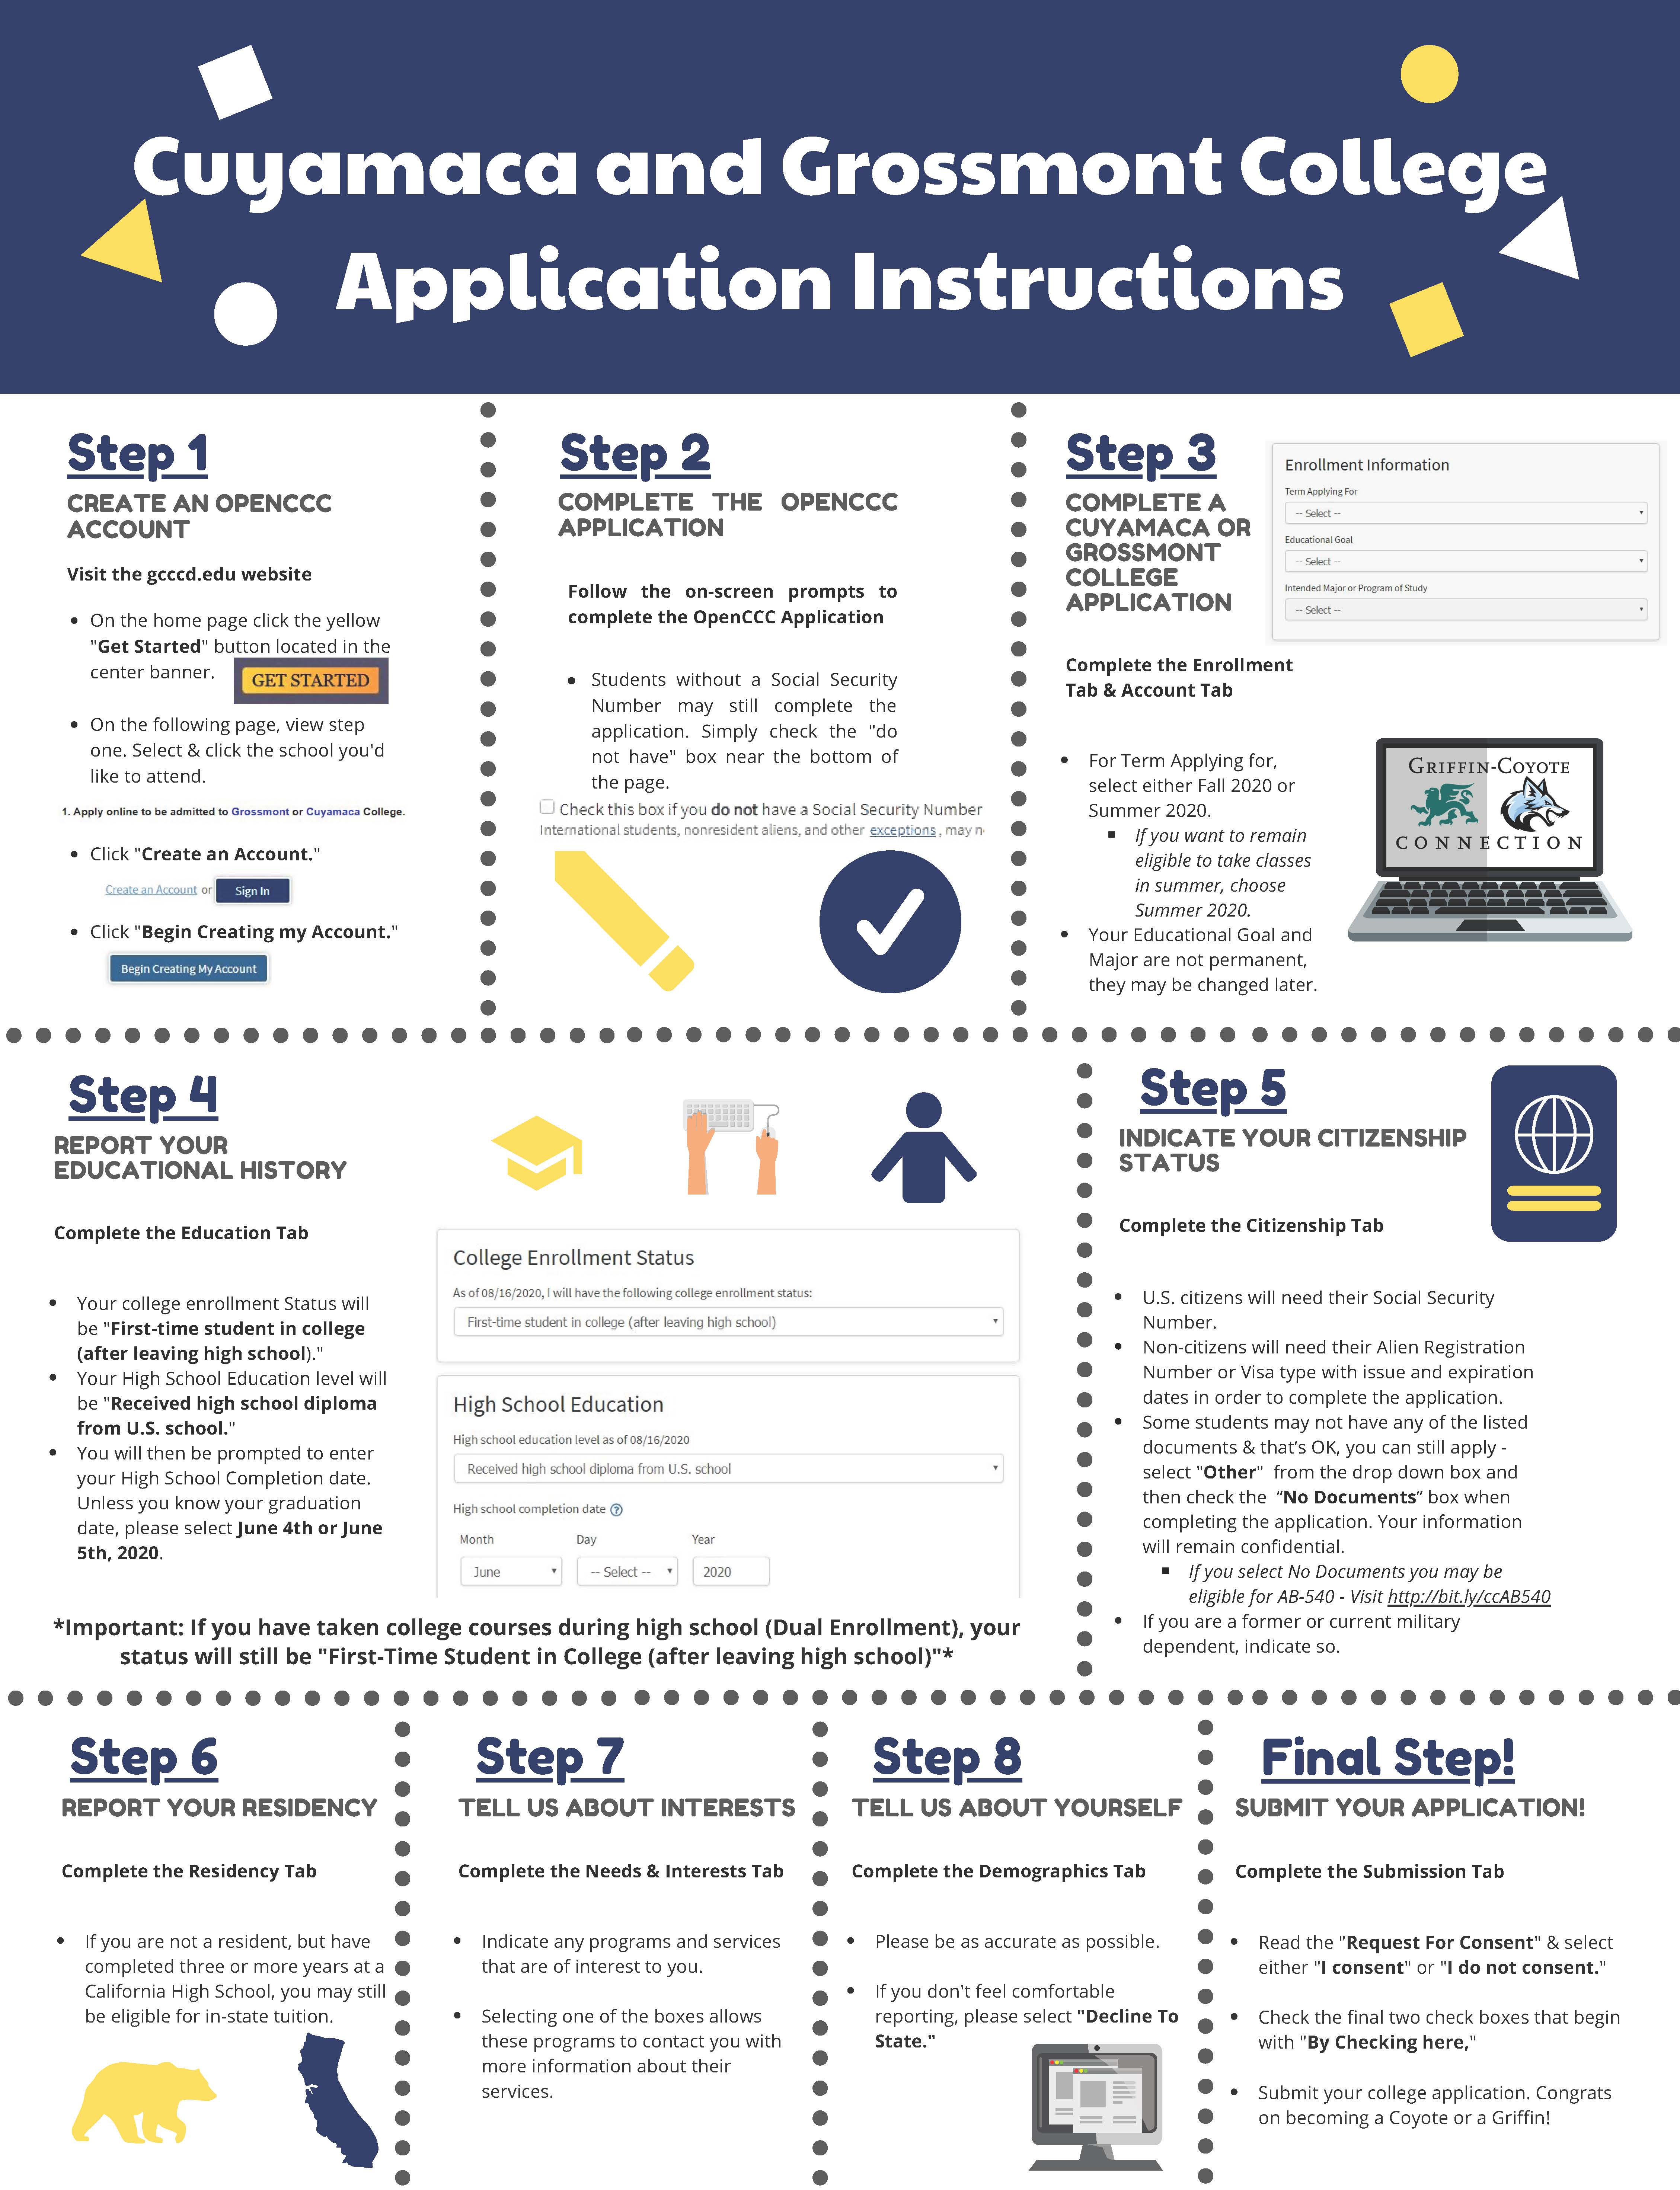 Application Instructions